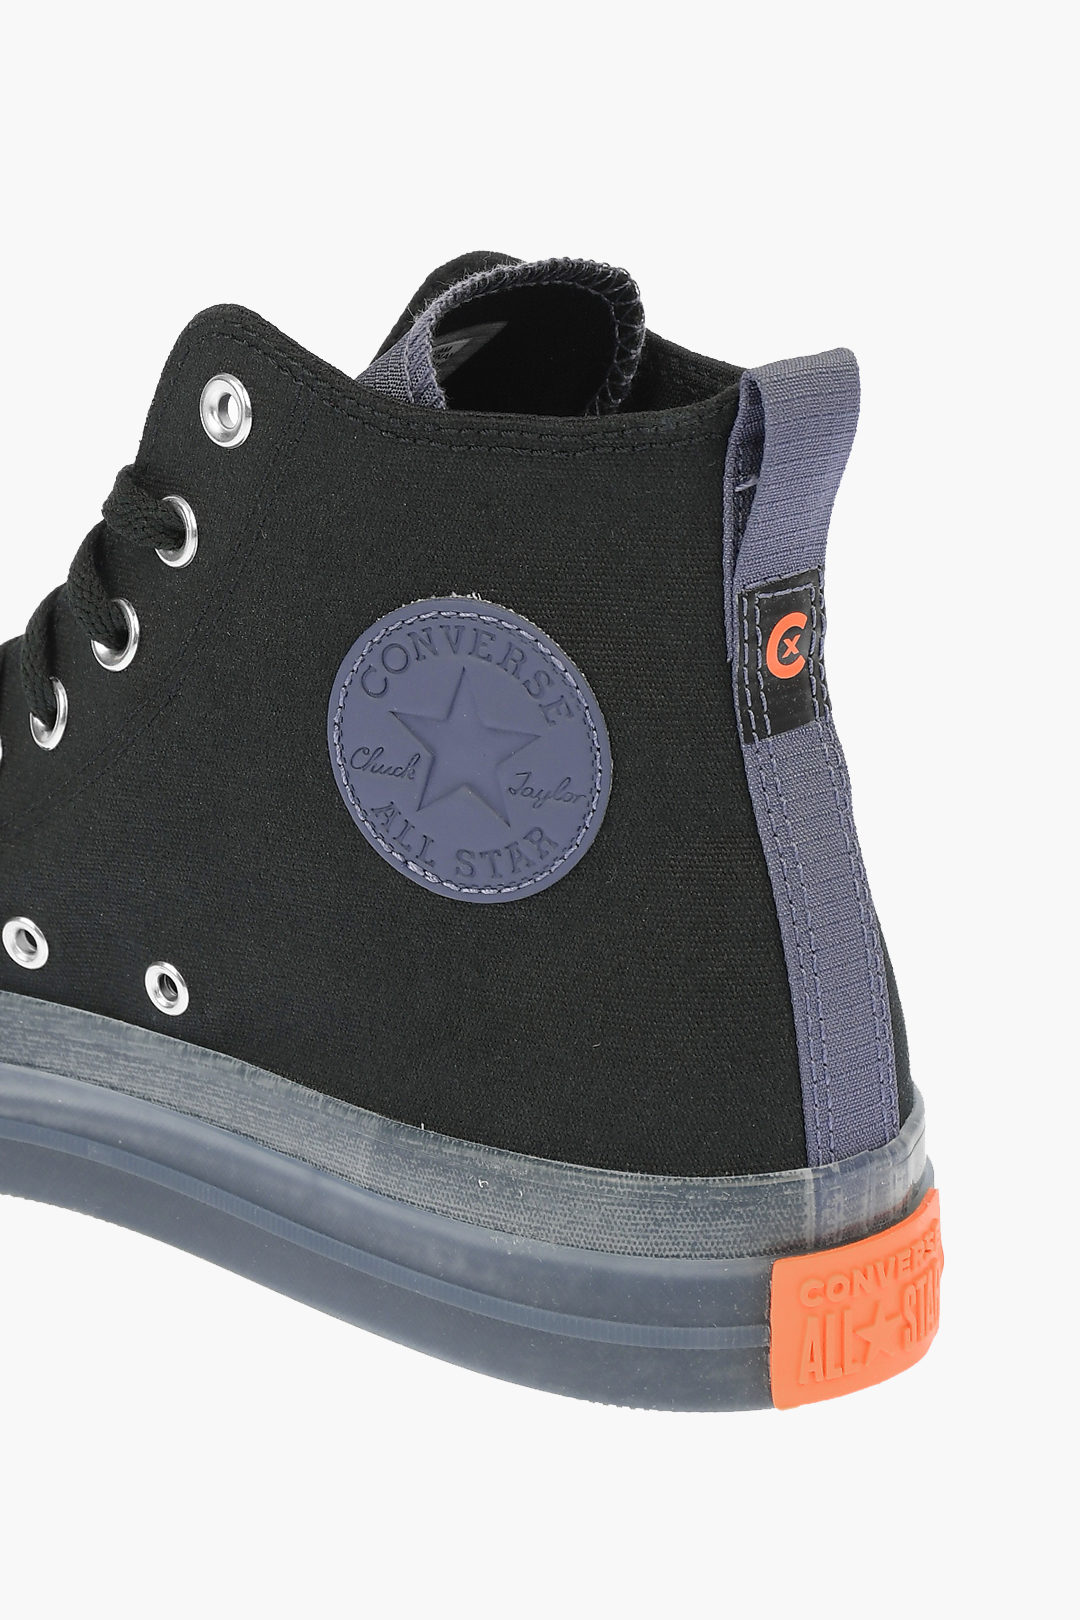 Converse CHUCK TAYLOR ALL STAR Fabric men - Outlet